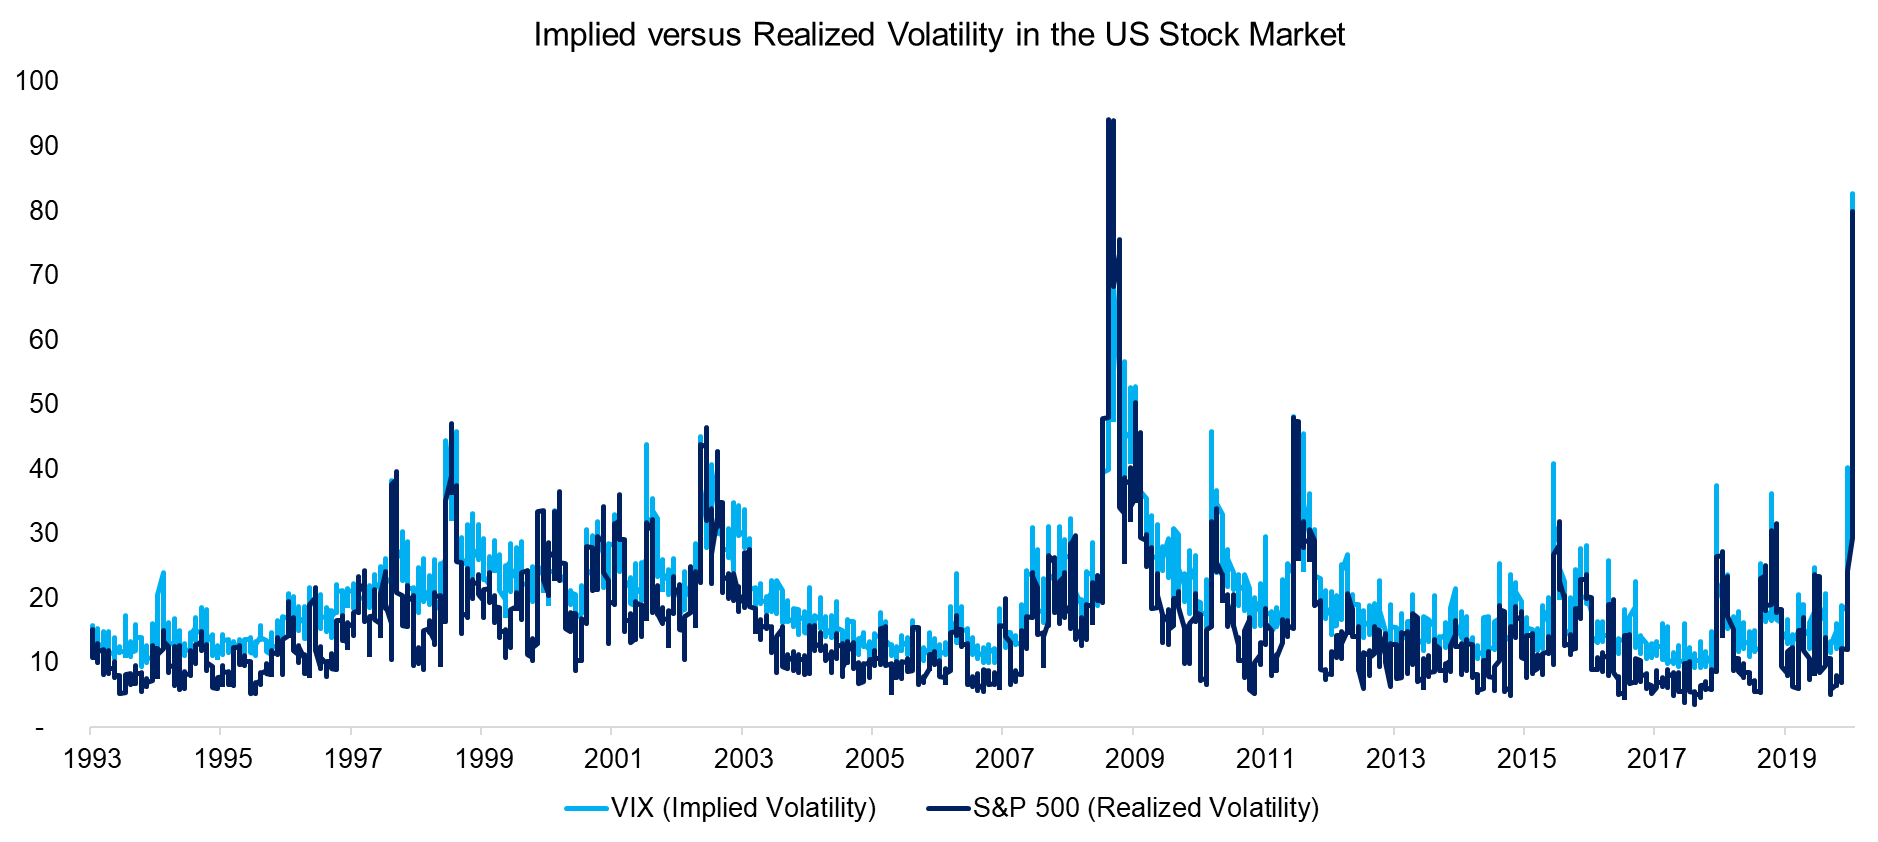 Implied versus Realized Volatility in the US Stock Market